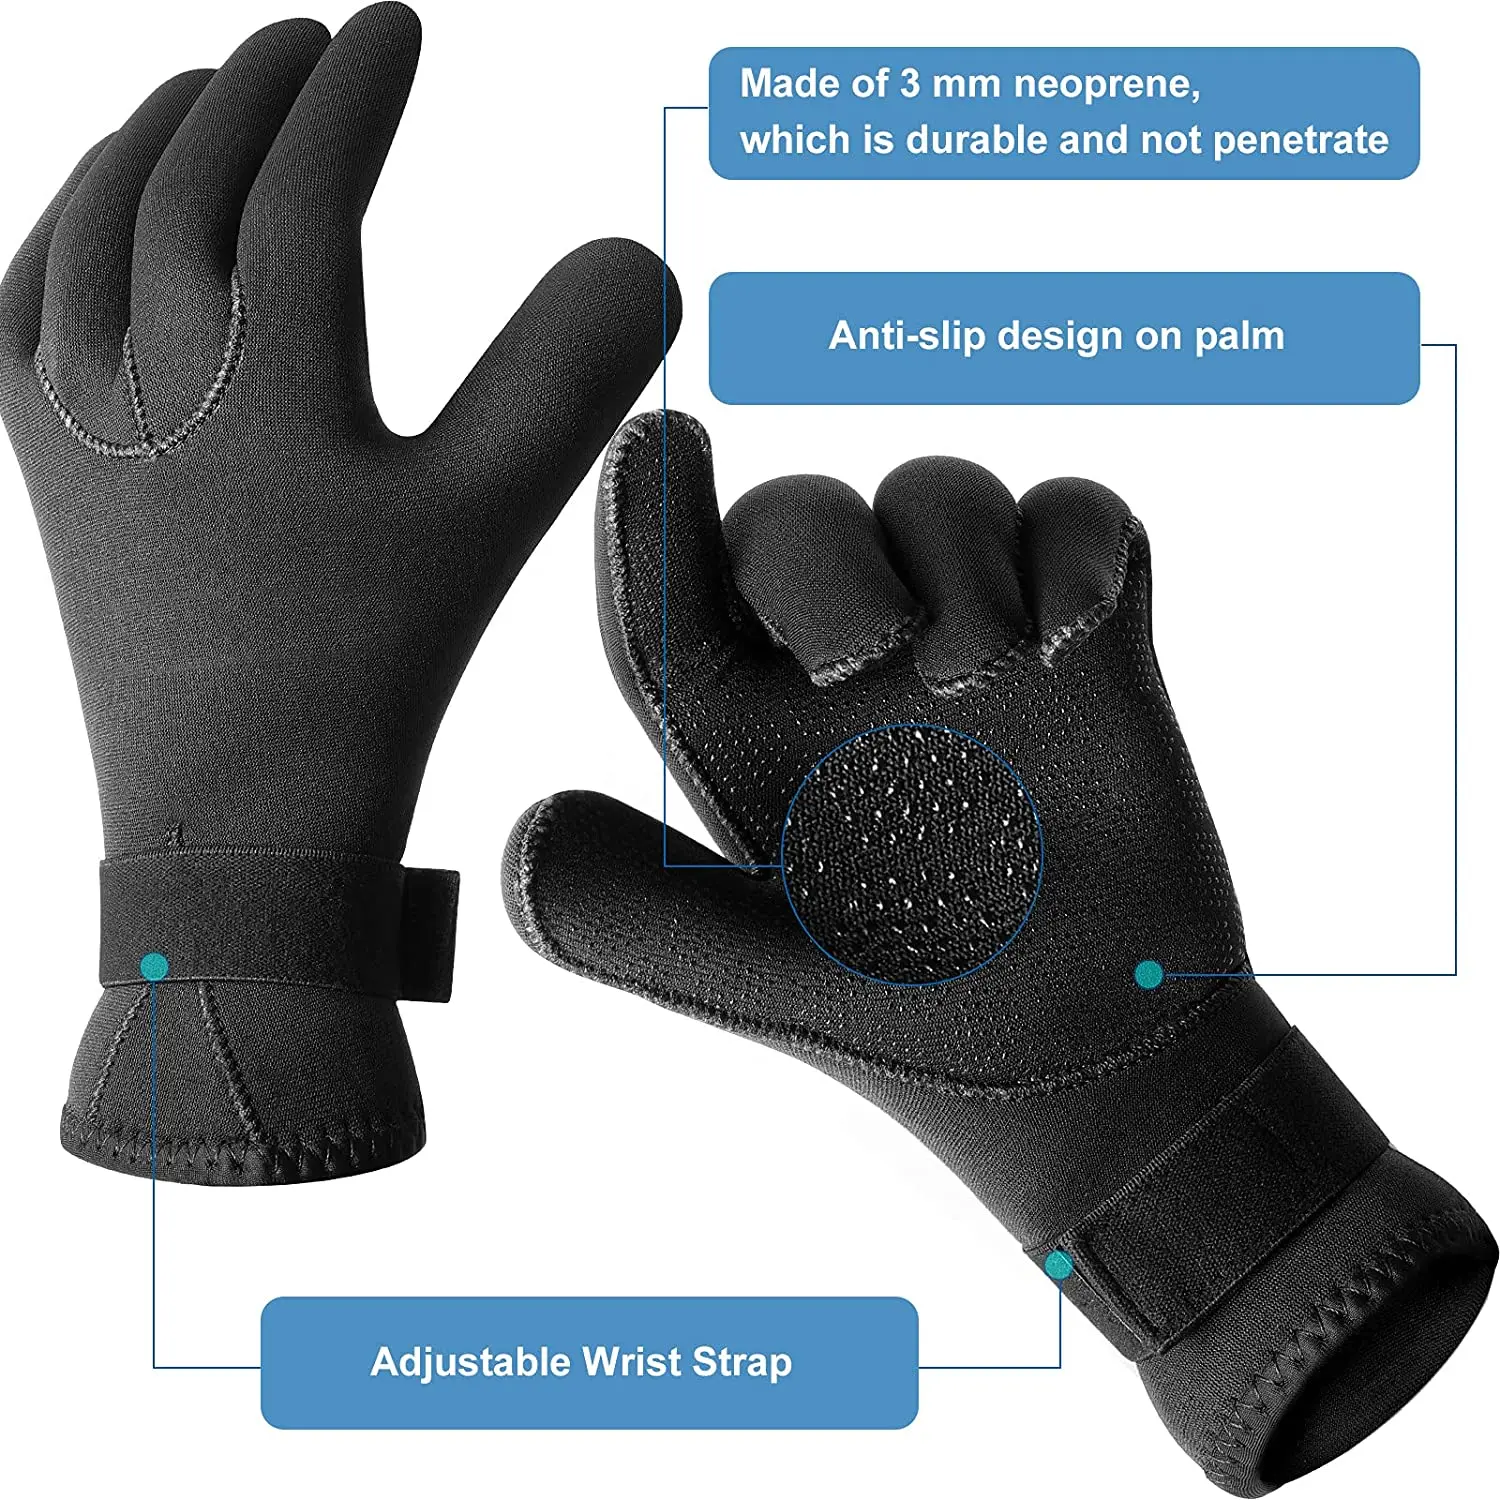 Thermal Anti Slip Flexible Dive Water Gloves Neoprene Scuba Surfing Wetsuit Diving Gloves with Adjustable Waist Strap